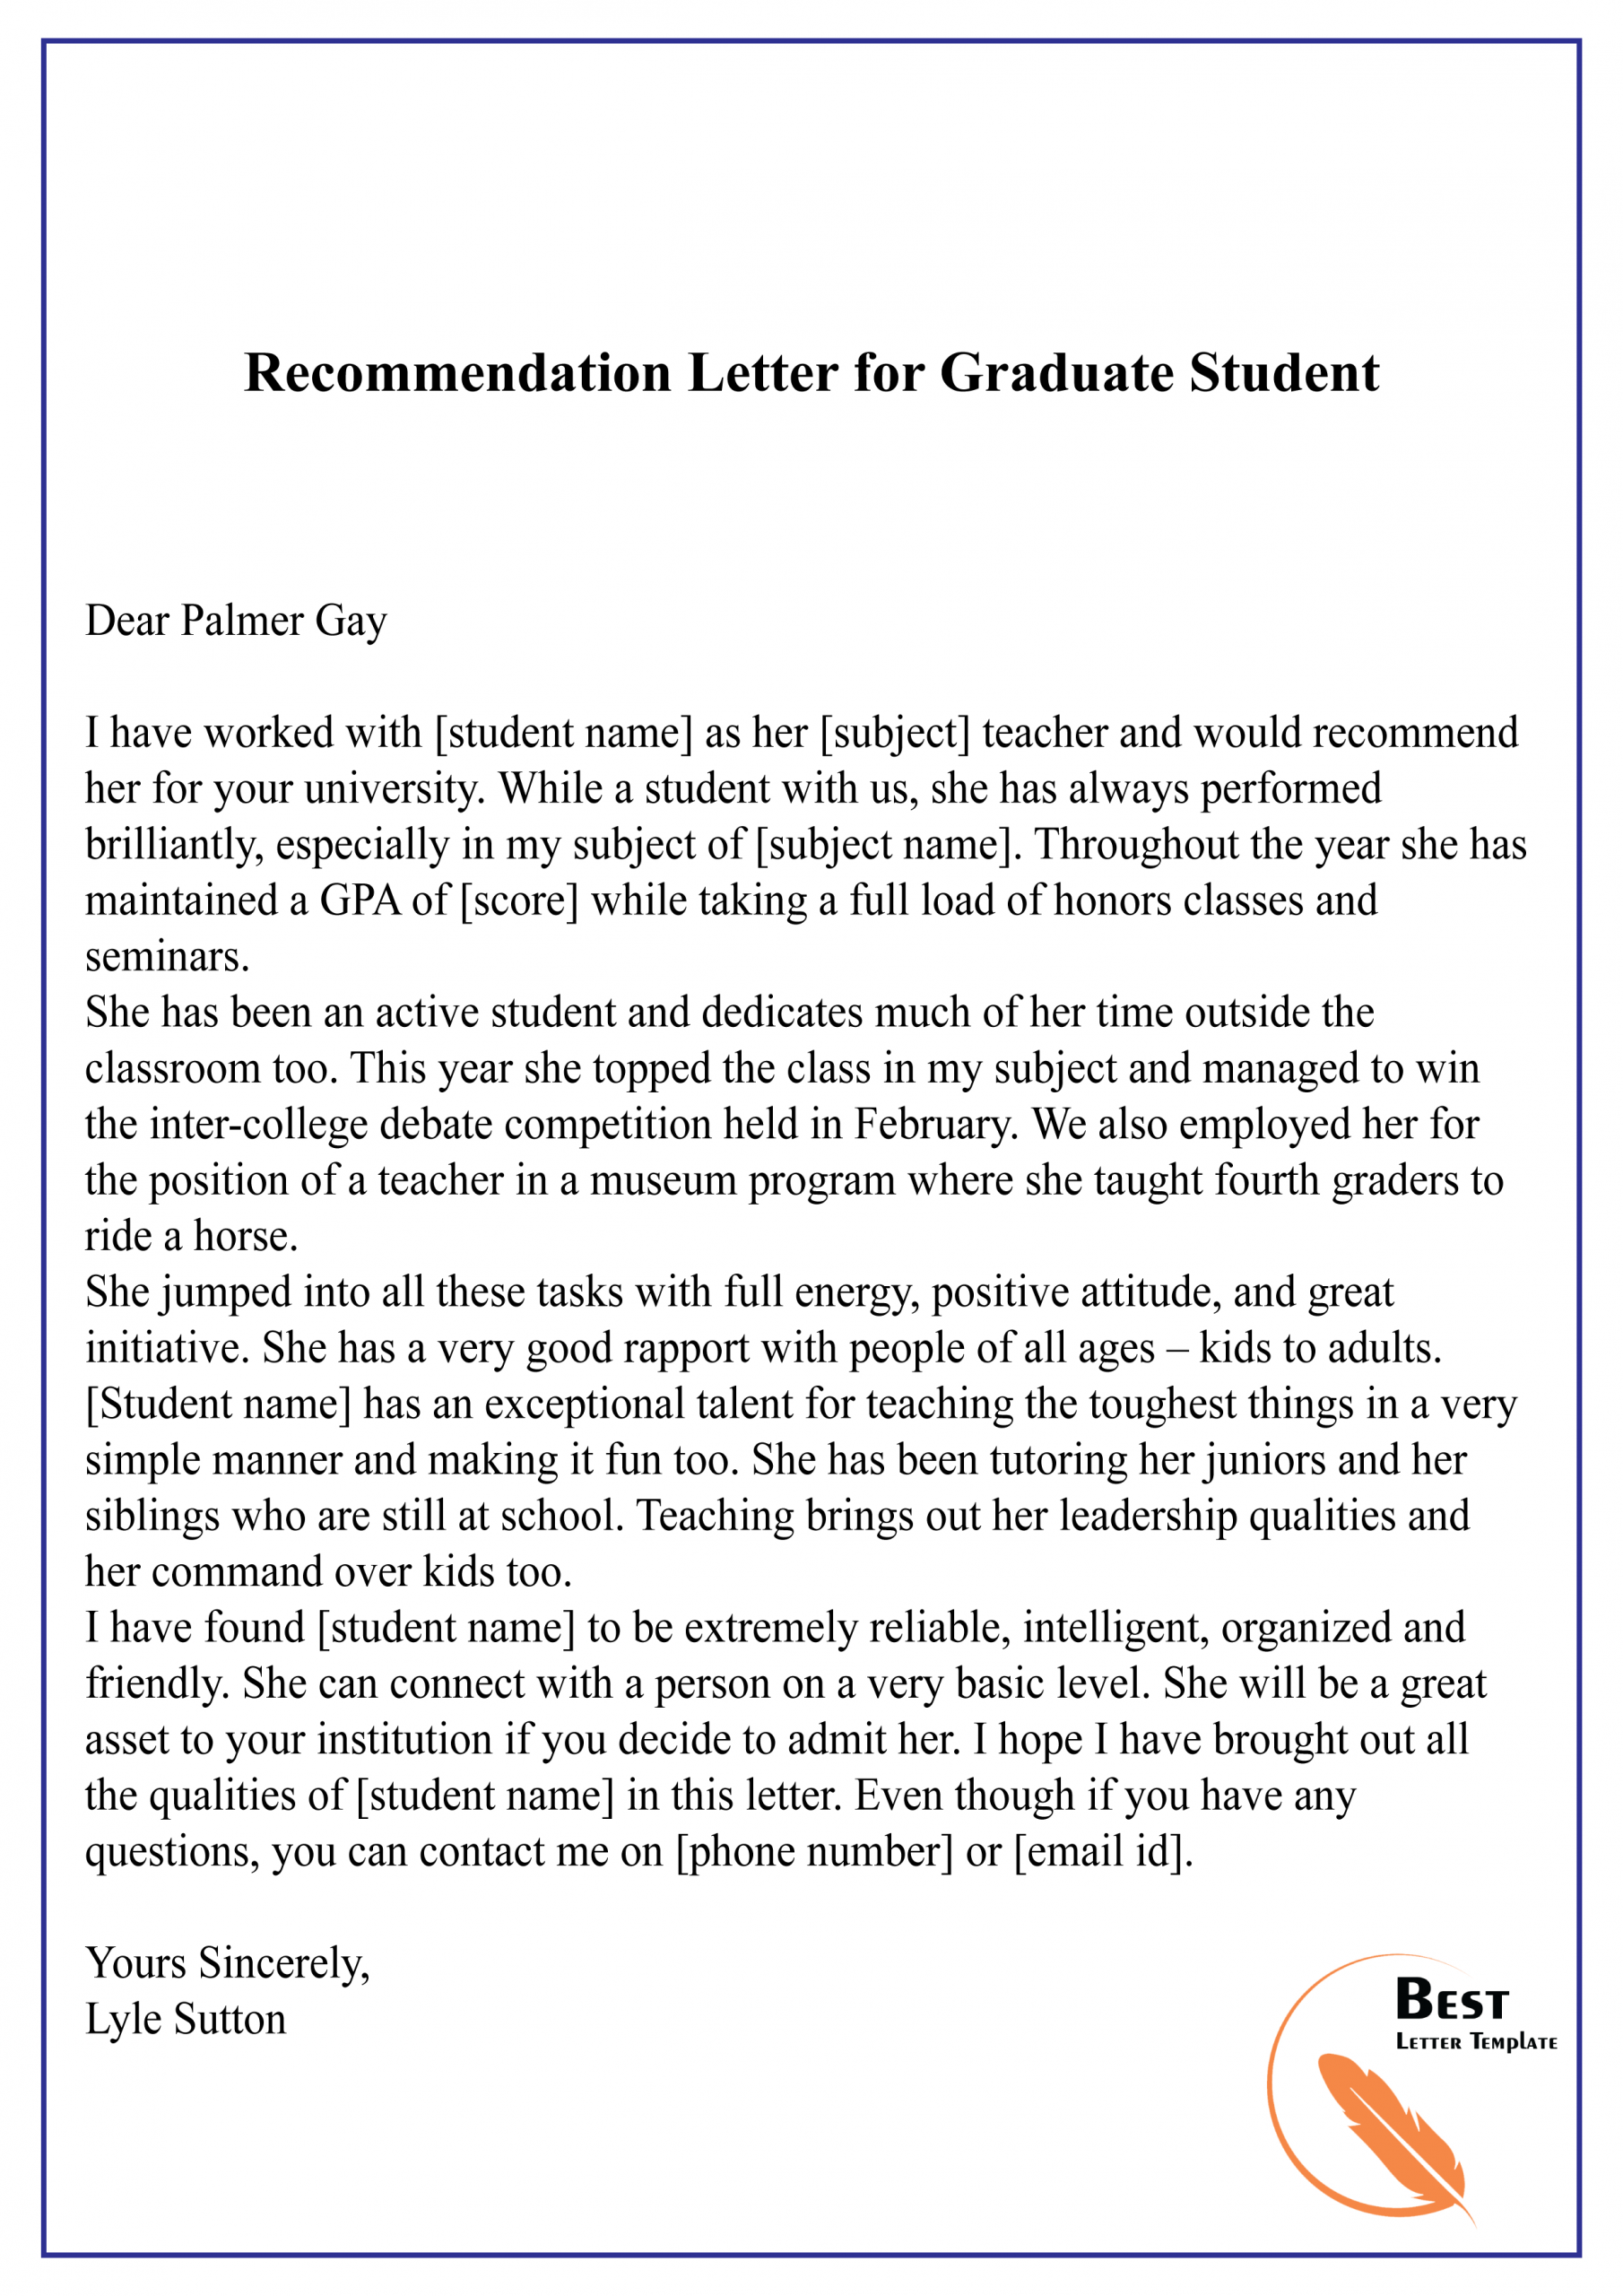 phd student recommendation letter